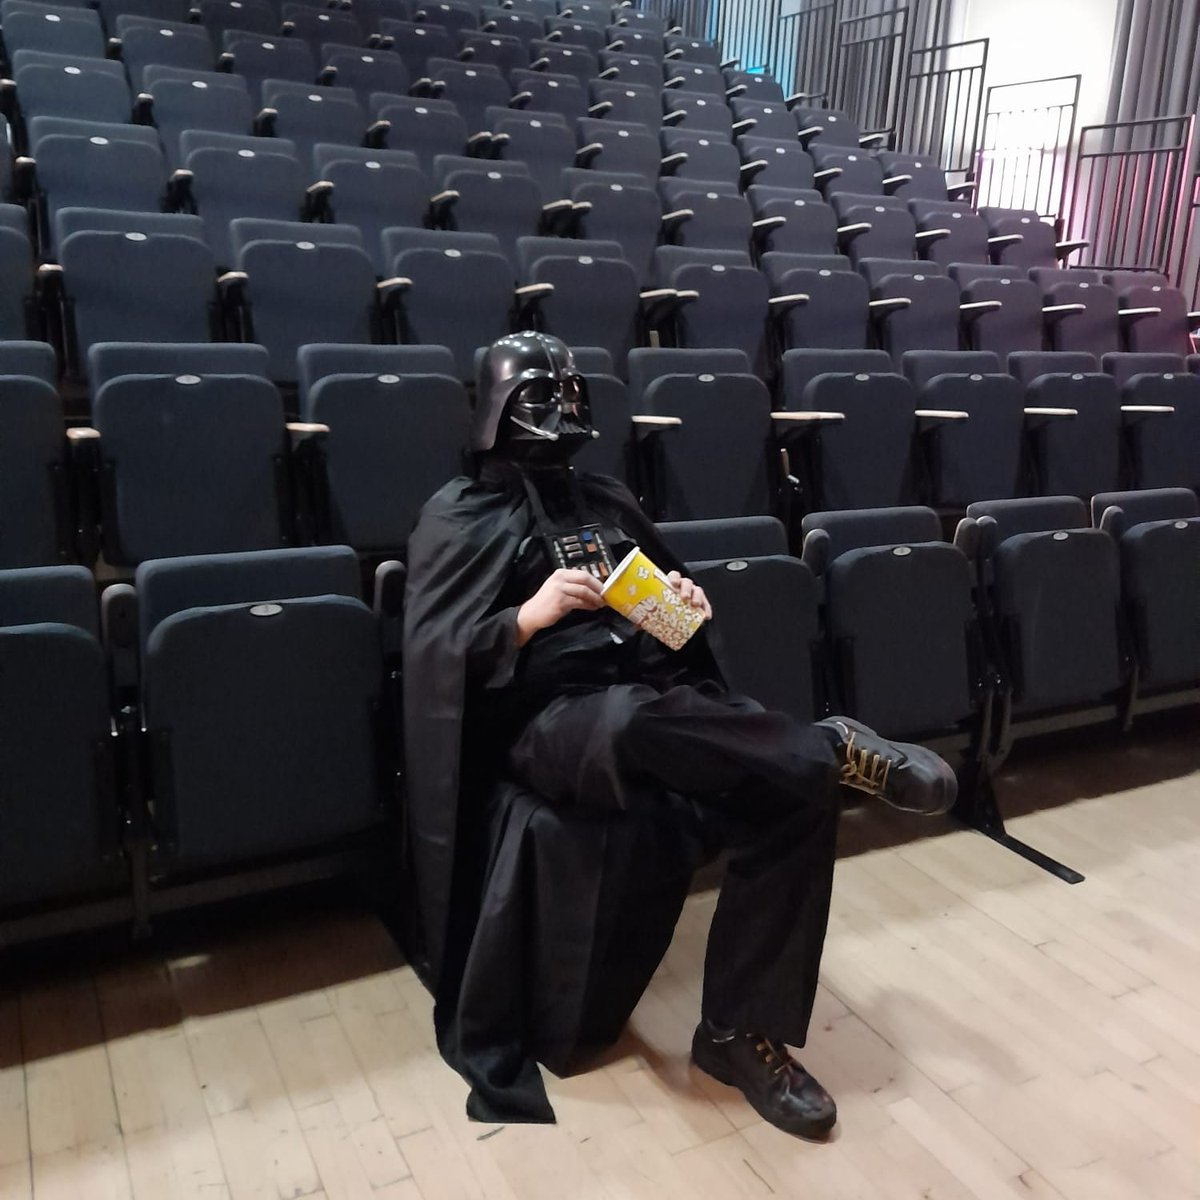 There's a disturbance in the Force as Darth Vader has taken his seat ready for our screenings of Star Wars Episode I: The Phantom Menace (U)! Fancy dress encouraged with cinema snack & drink deals available too!👇 📅 Sat 4 May, 1pm & Wed 8 May, 7pm 🎟️ bishopaucklandtownhall.org.uk/star-wars